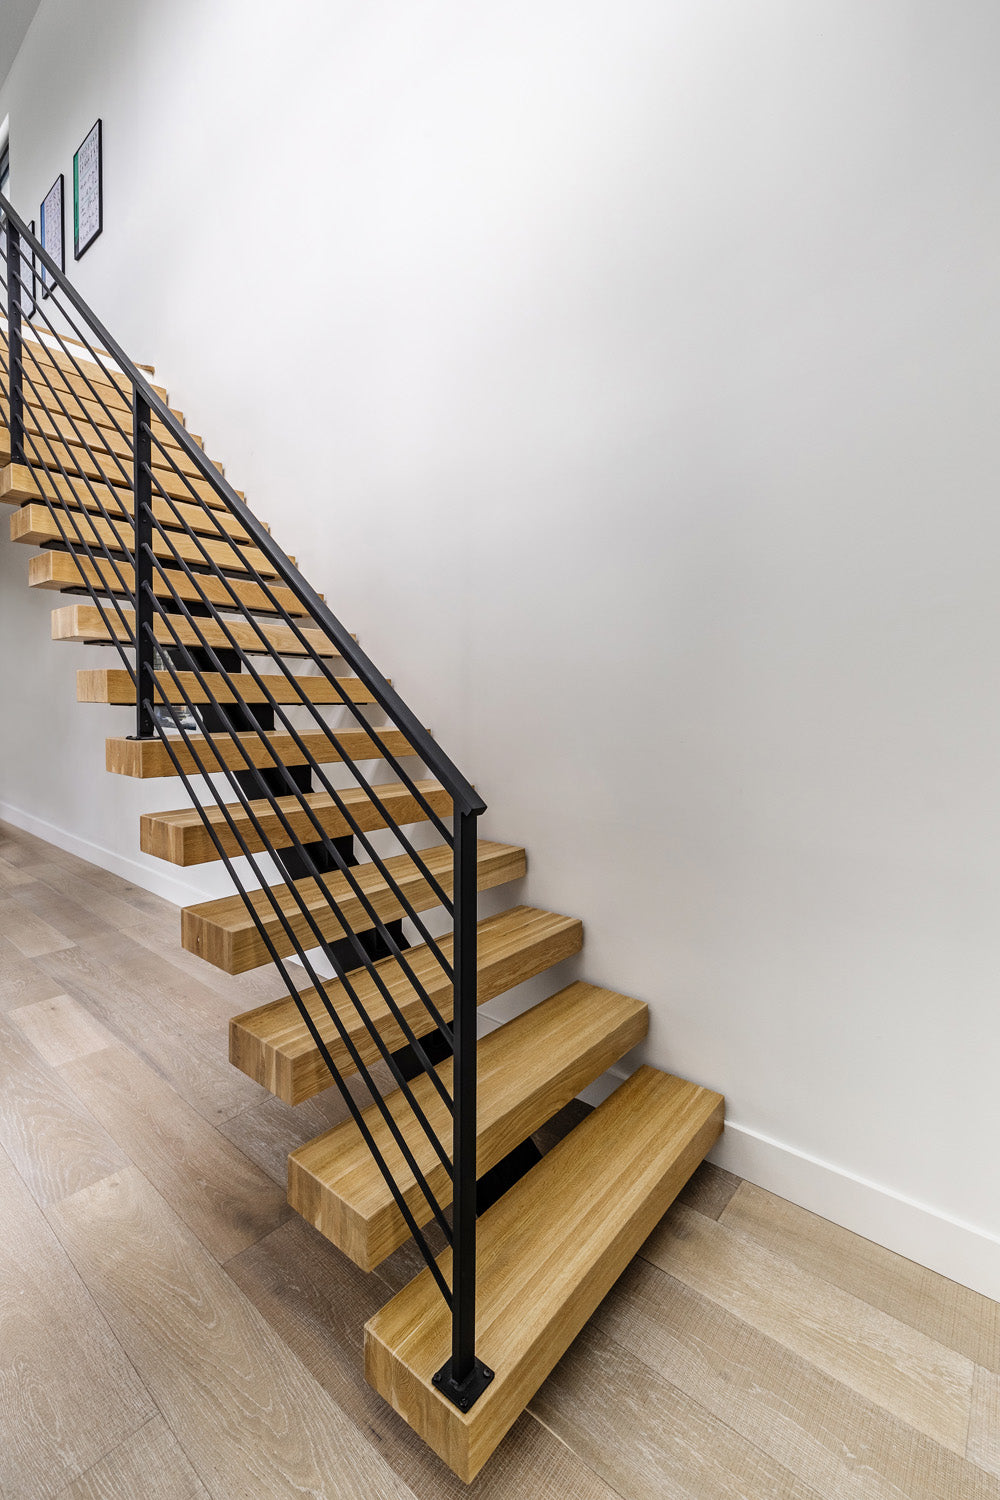 Stair system by Edgework Creative